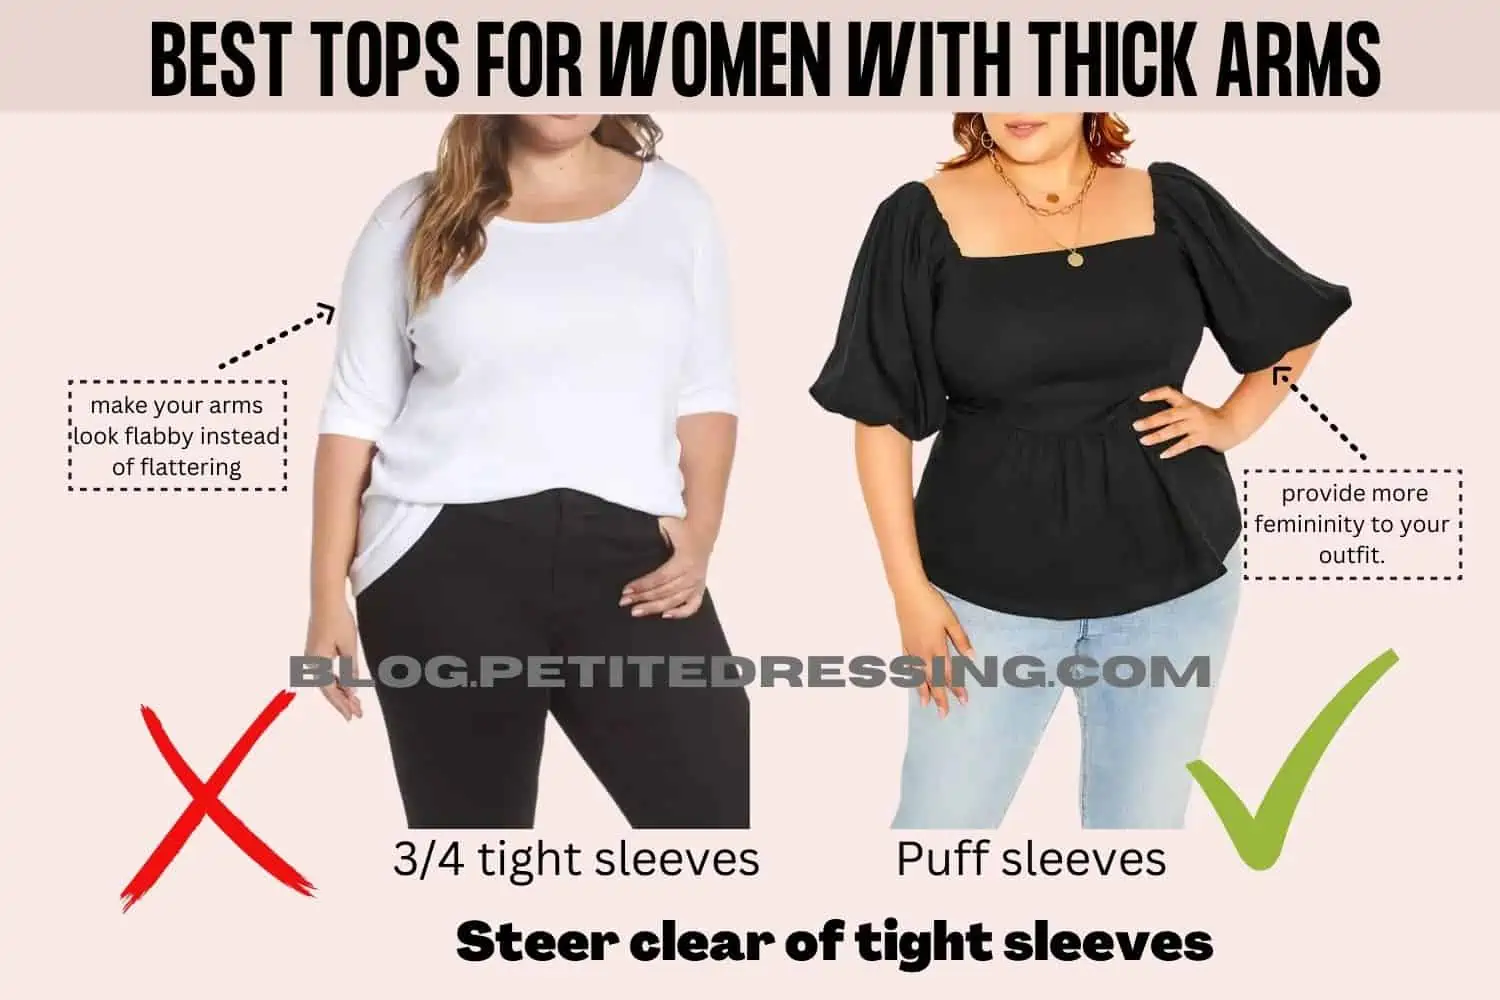 The Complete Tops Guide for Women With Thick Arms - Petite Dressing